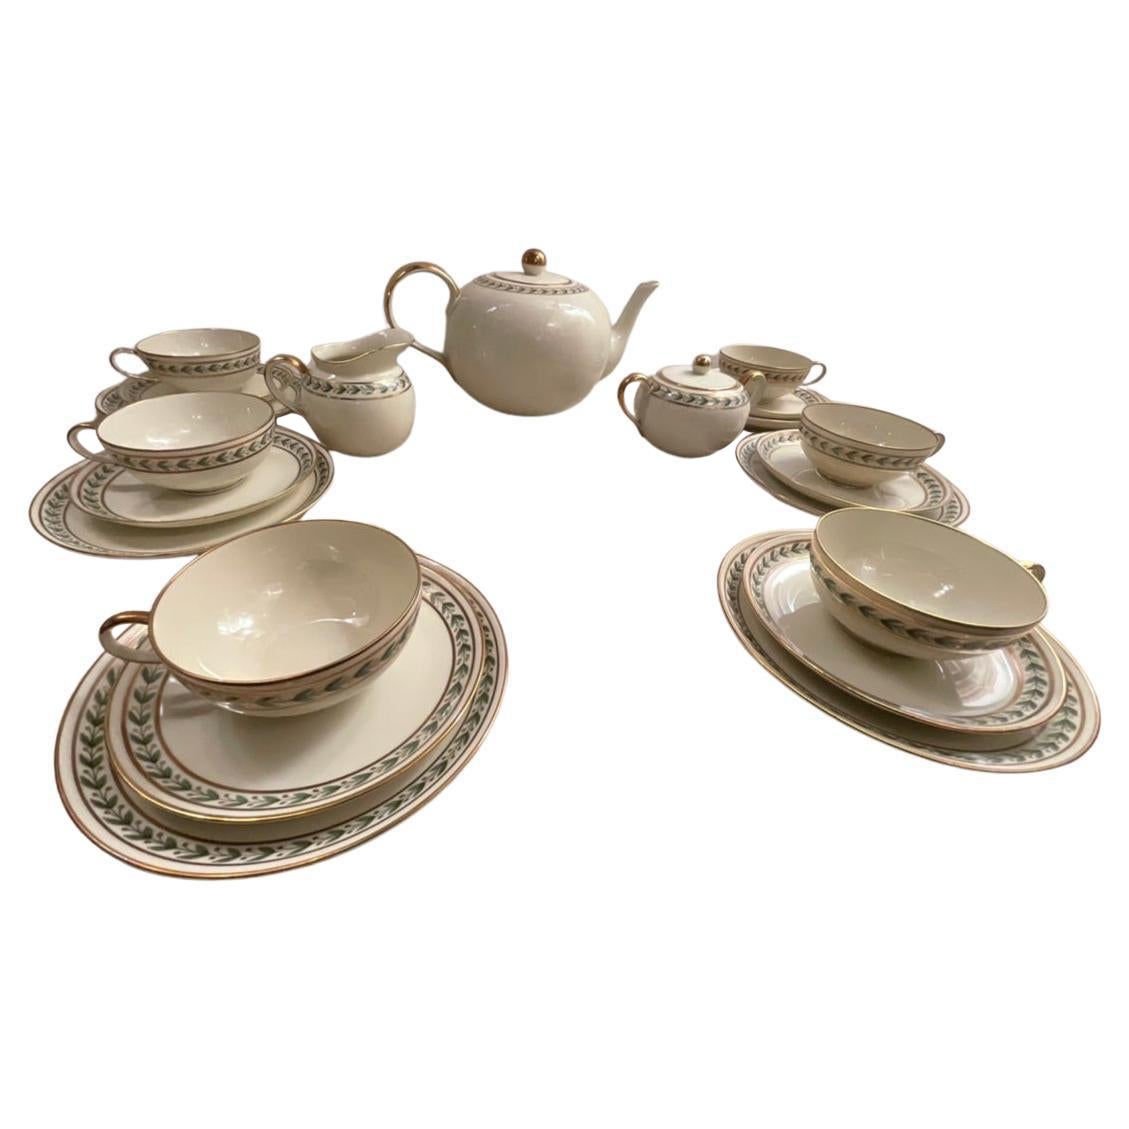 Gio Ponti, Tea for 6 with Dessert Plates, in Porcelain Richard Ginori, Year 1939 For Sale